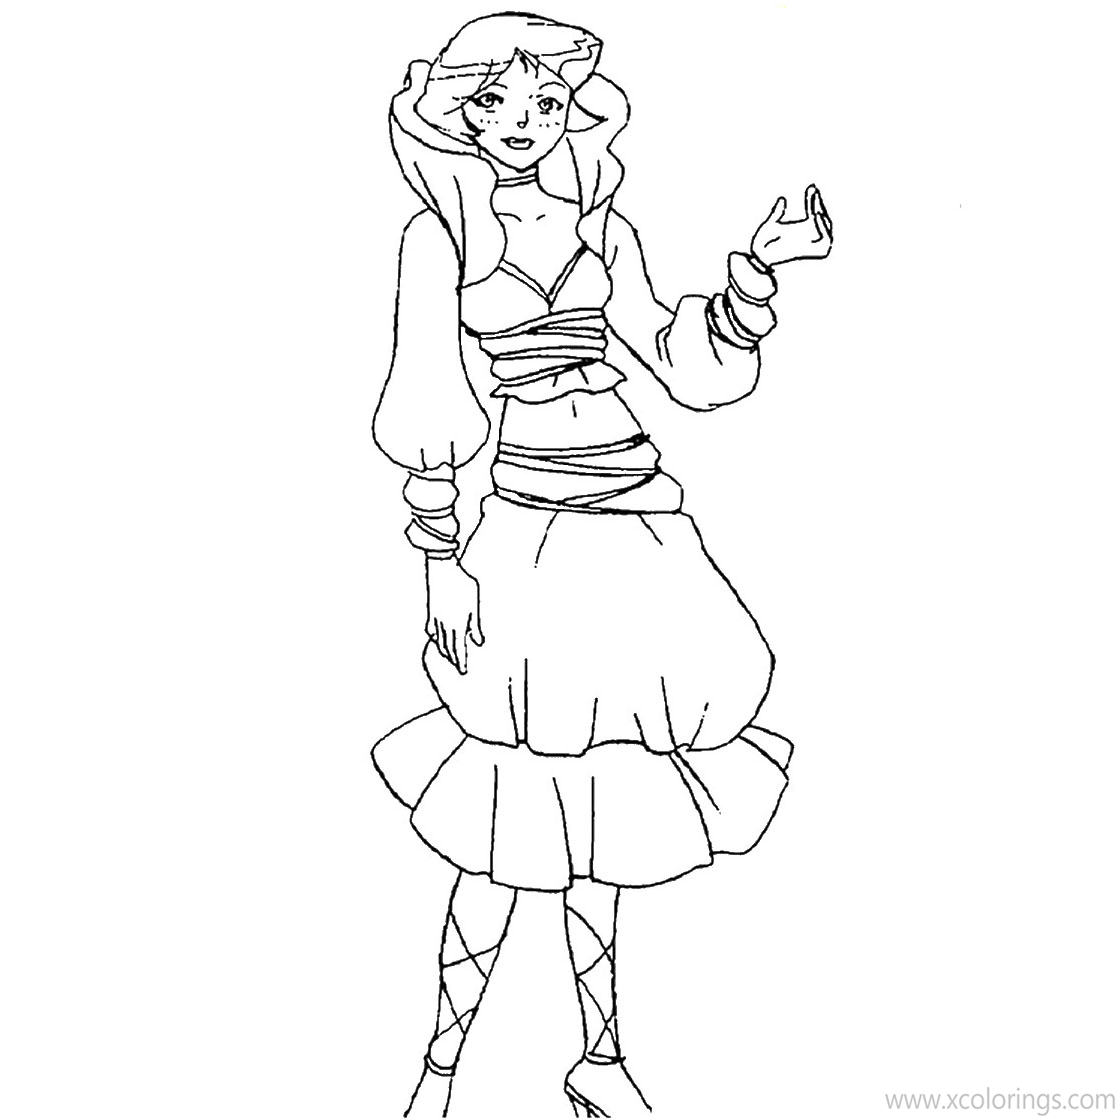 Free Totally Spies Coloring Pages Alex with Dress printable